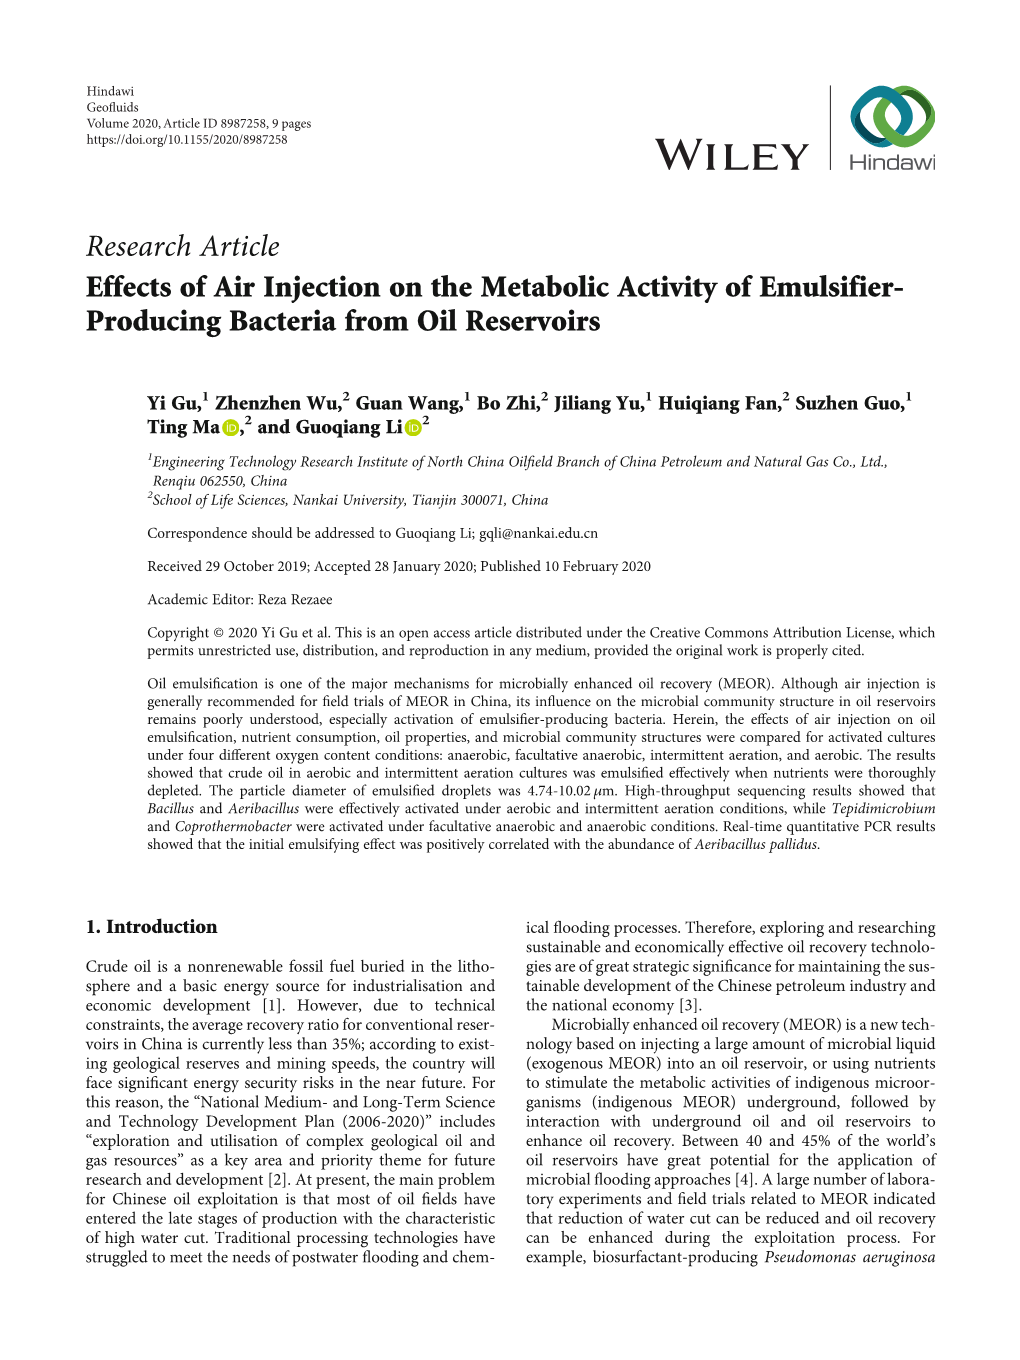 Effects of Air Injection on the Metabolic Activity of Emulsifier-Producing